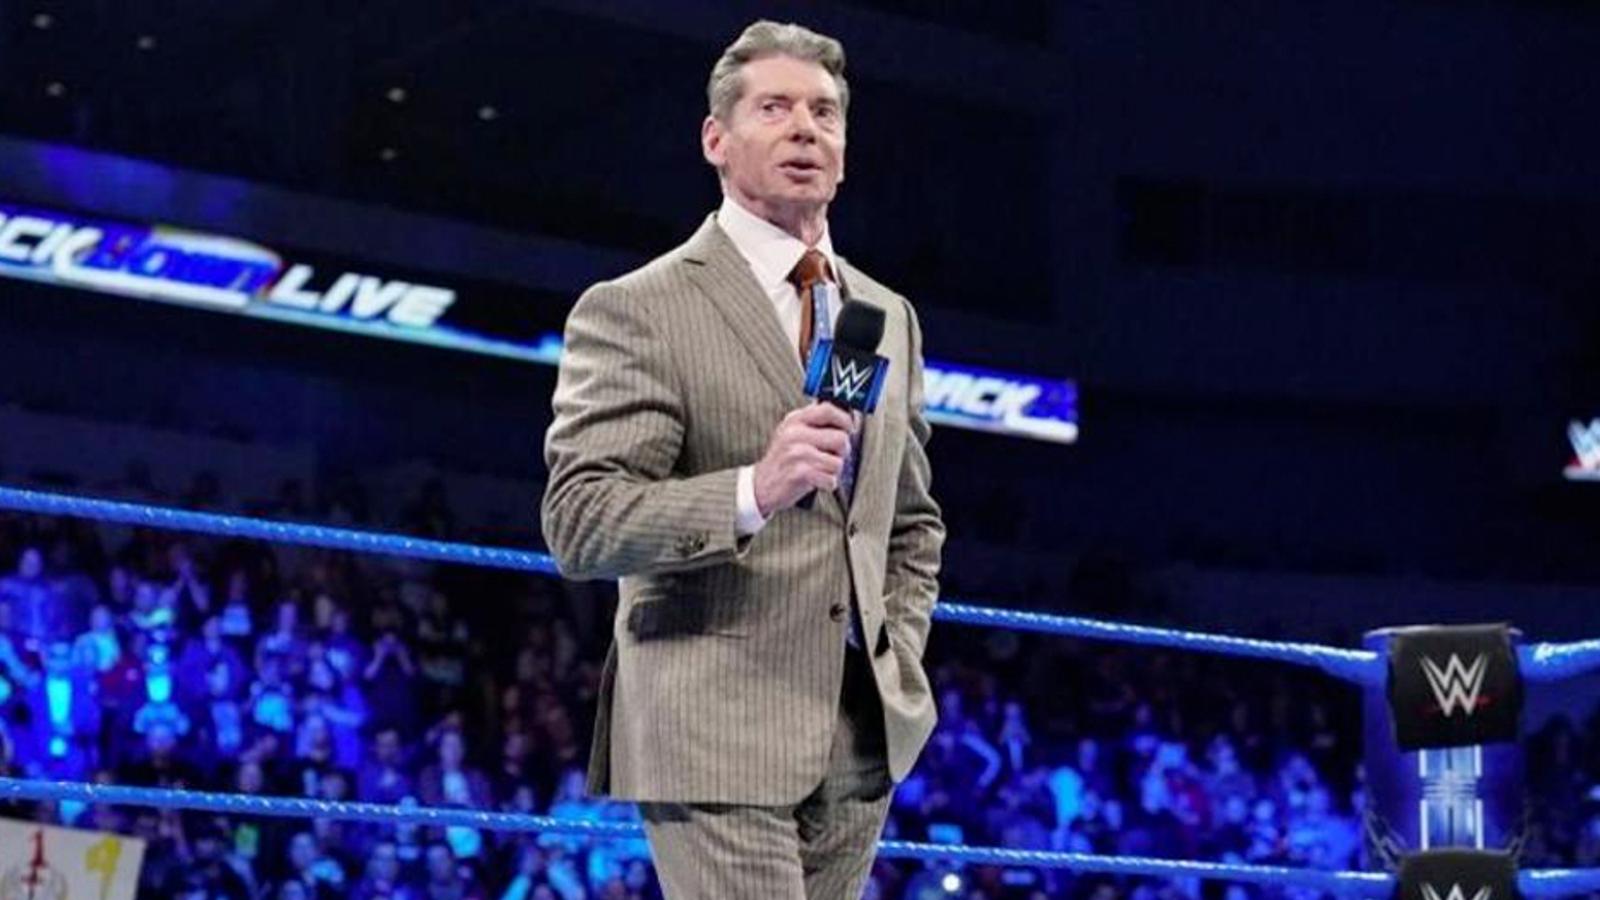 Vince McMahon and the WWE paving the way for the return of the NHL